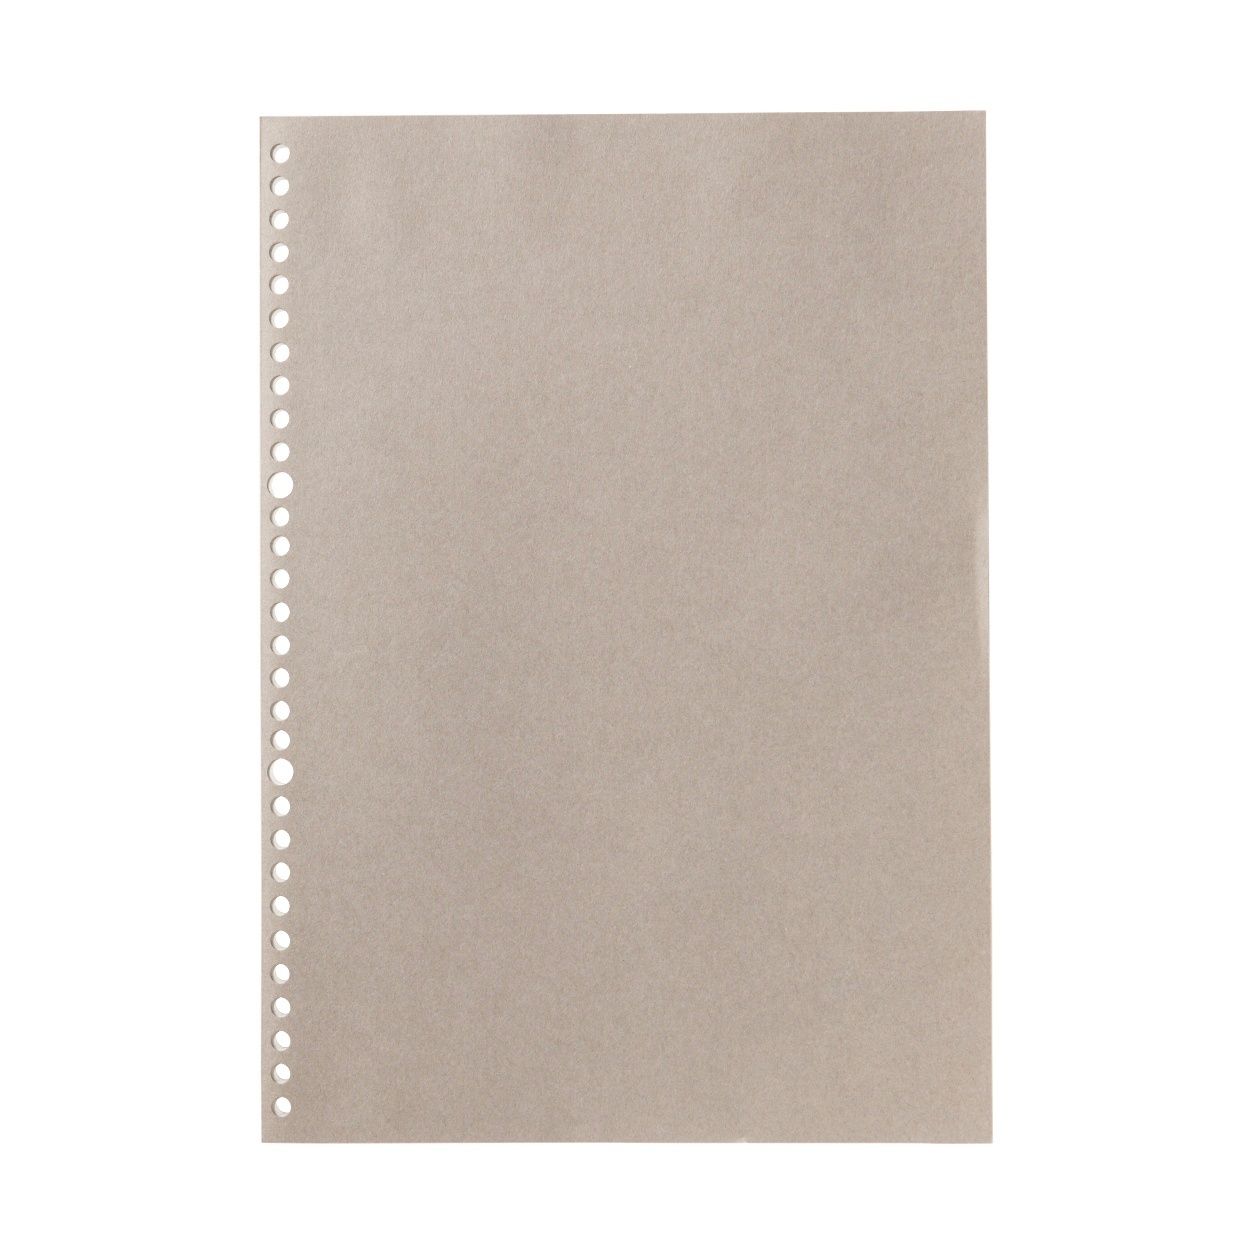 Notebook Type Loose Leaf Paper - Graph